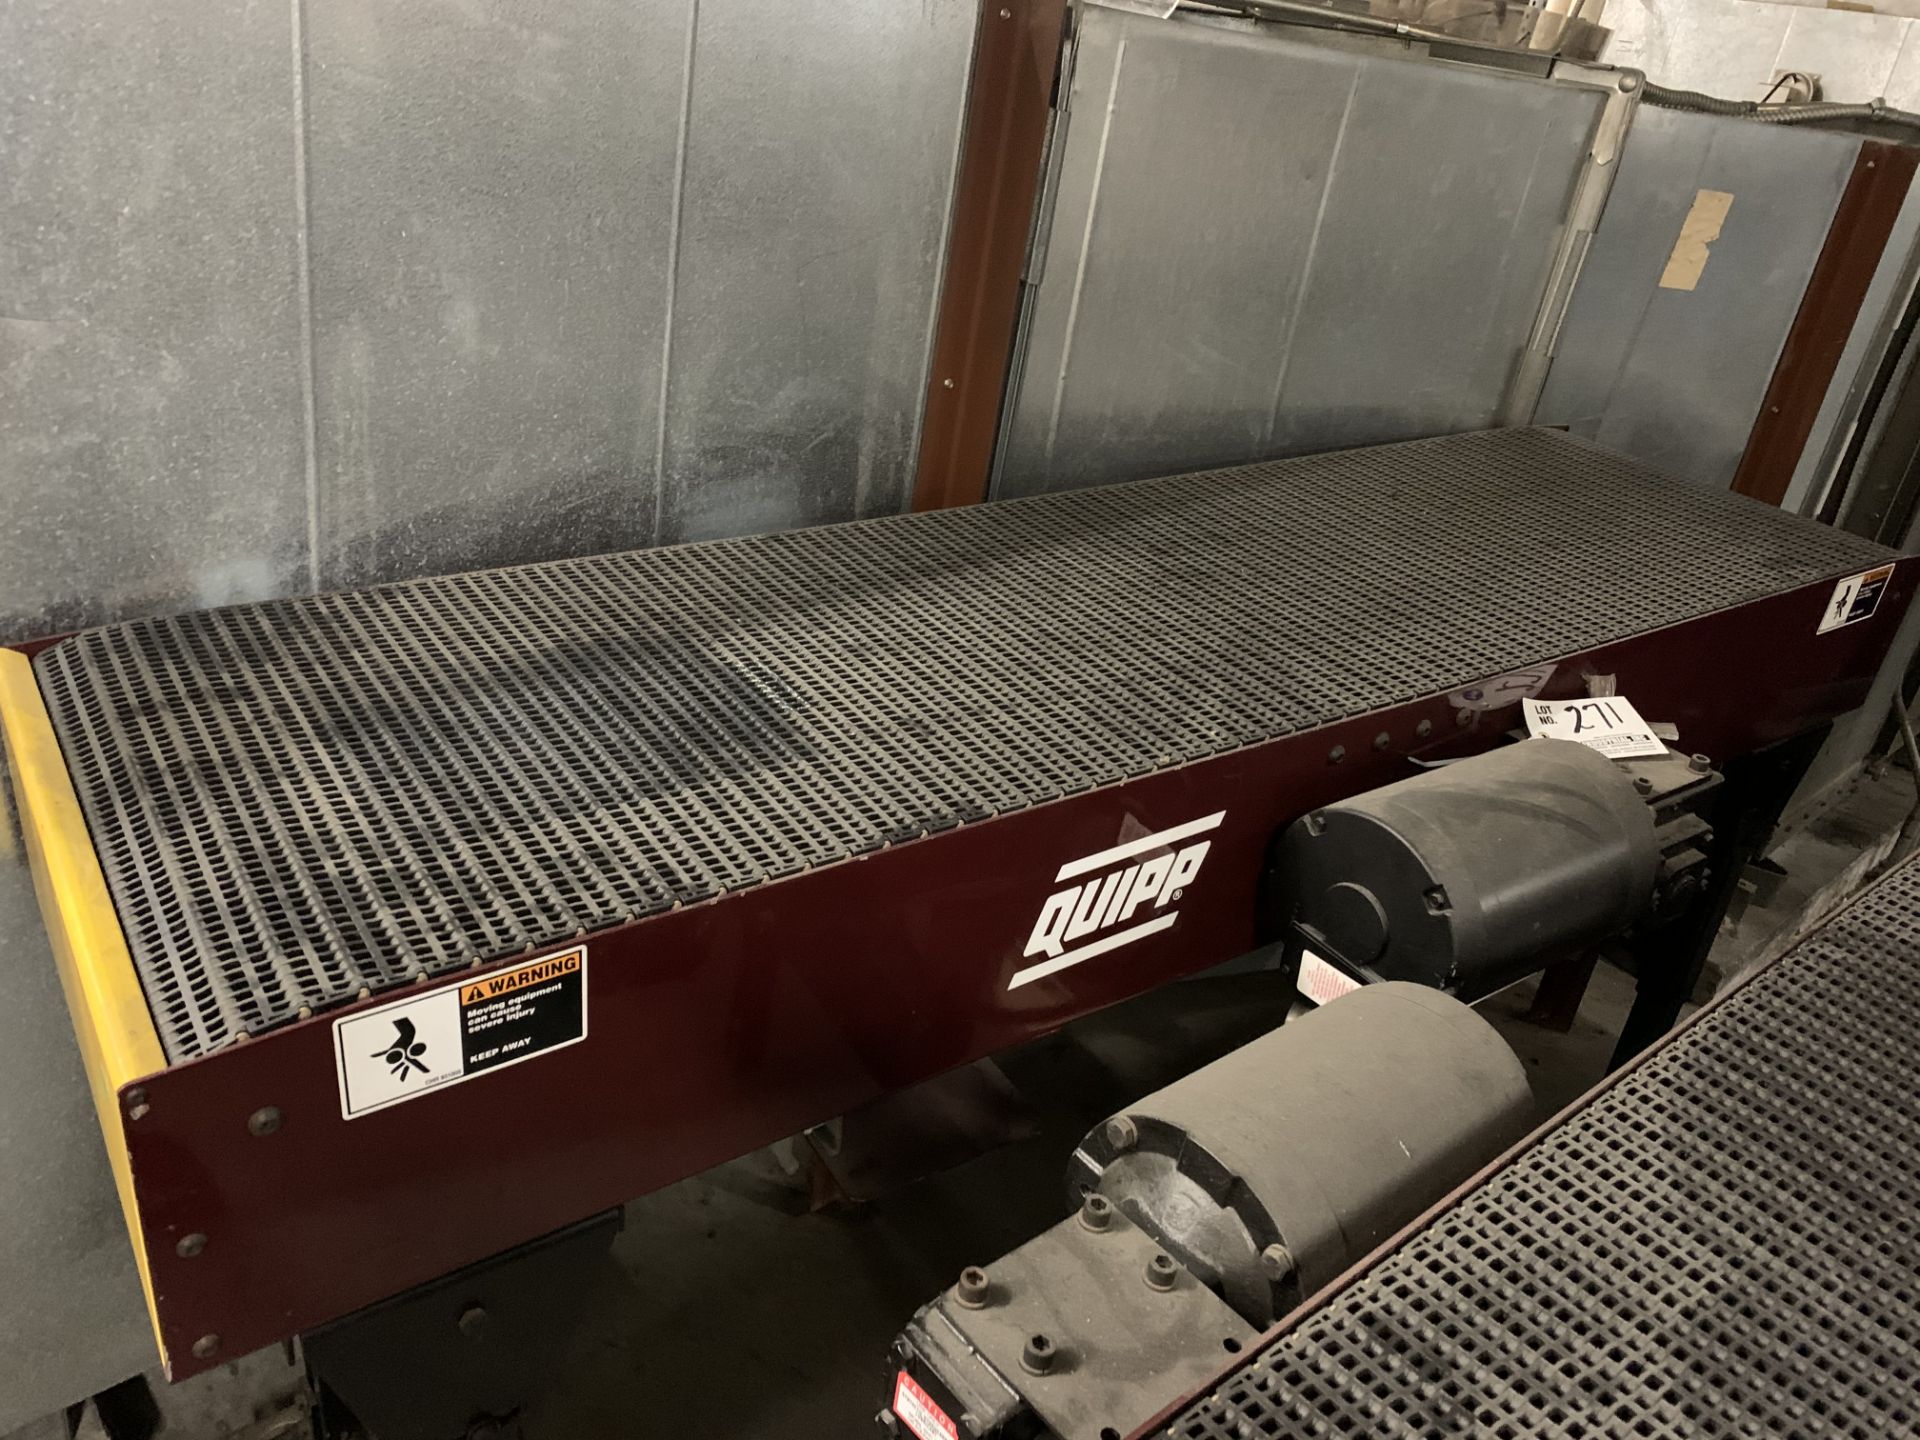 Unused Quipp 6' X 18" wide automated conveyor on casters